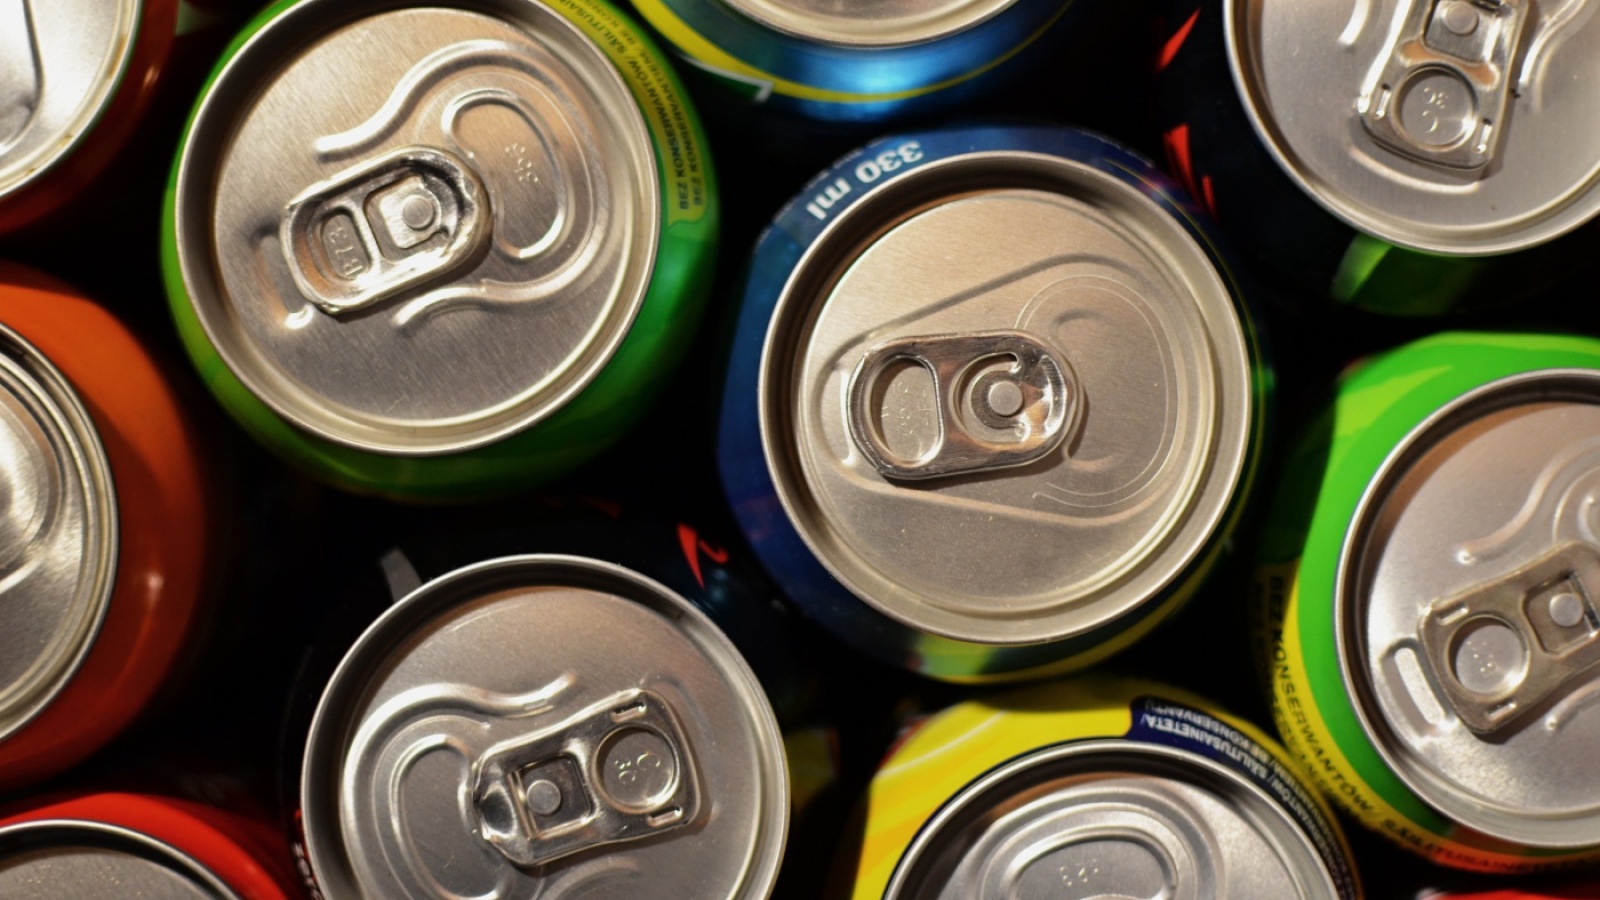 Why are some foods canned in Tin and others in Aluminum?